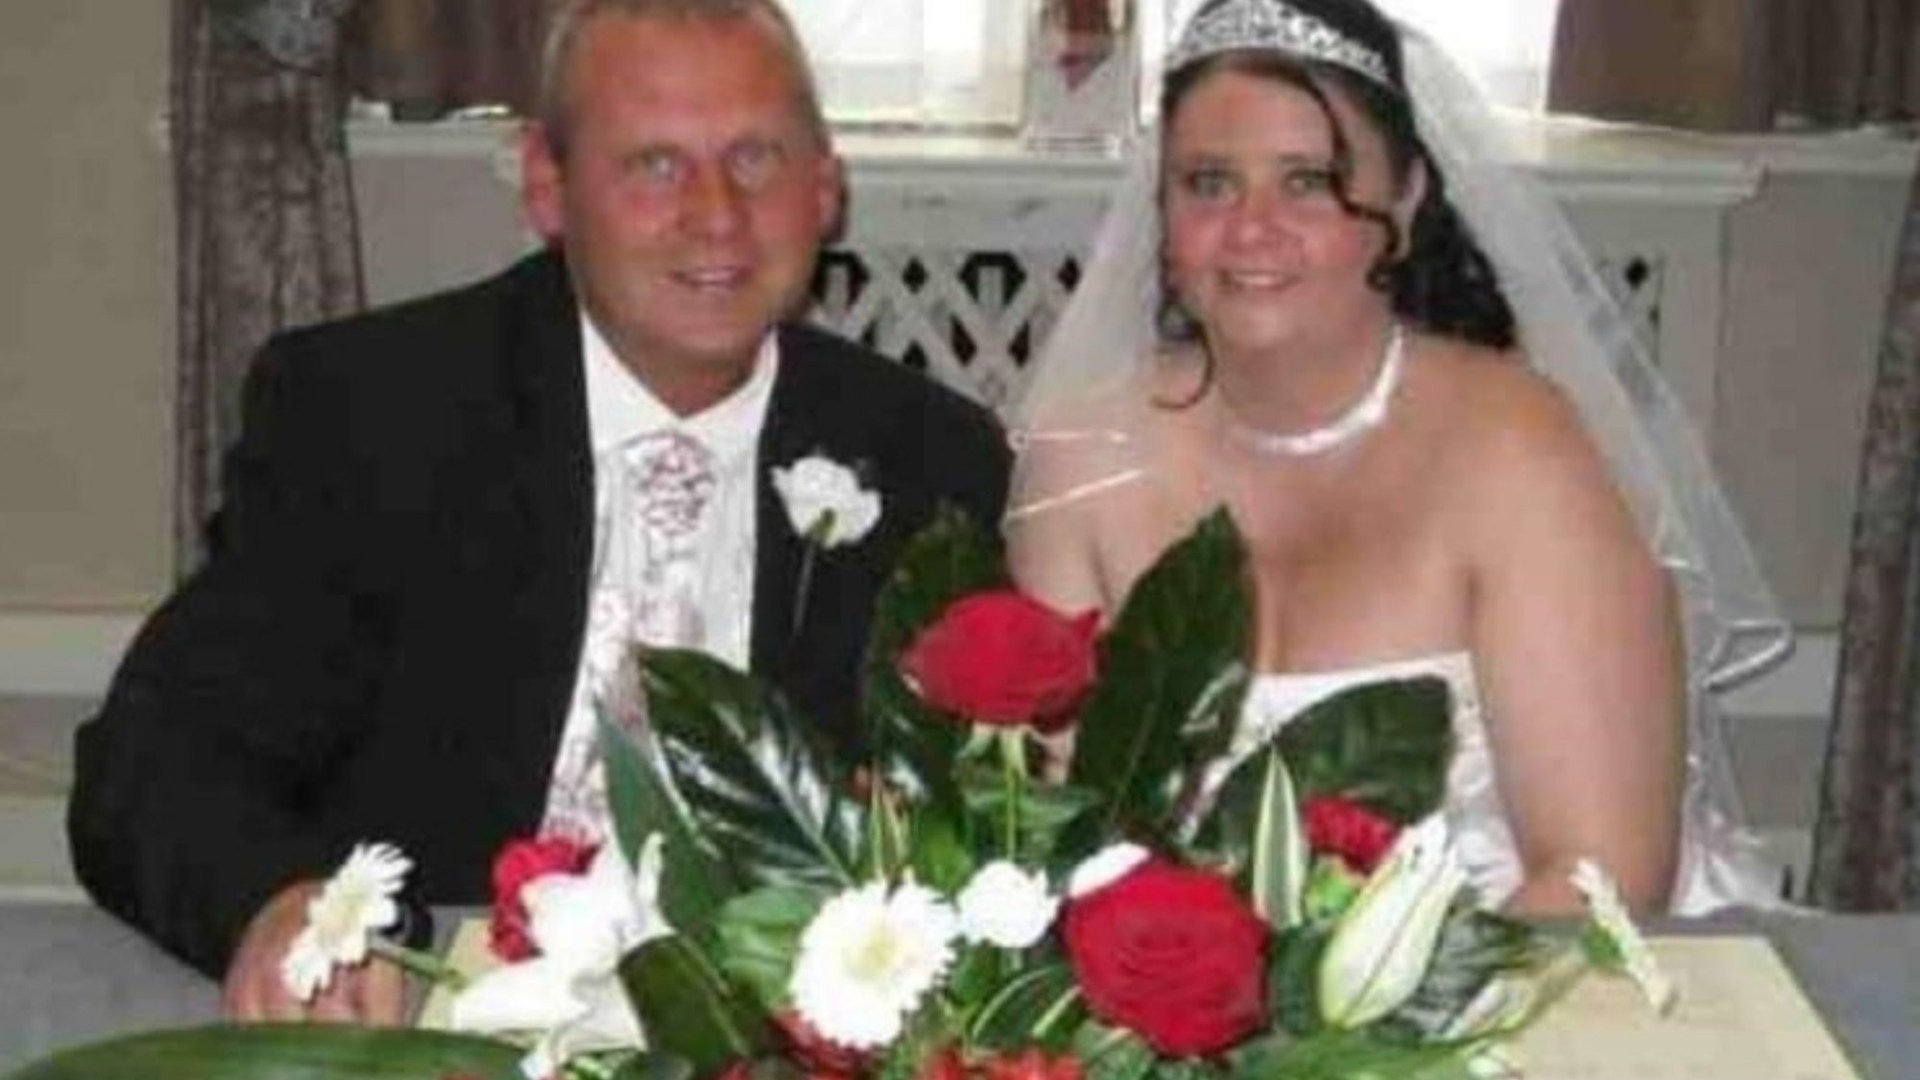 Shocking Discovery: Uncovering Husband’s Bigamy Through Hotel Website Photos